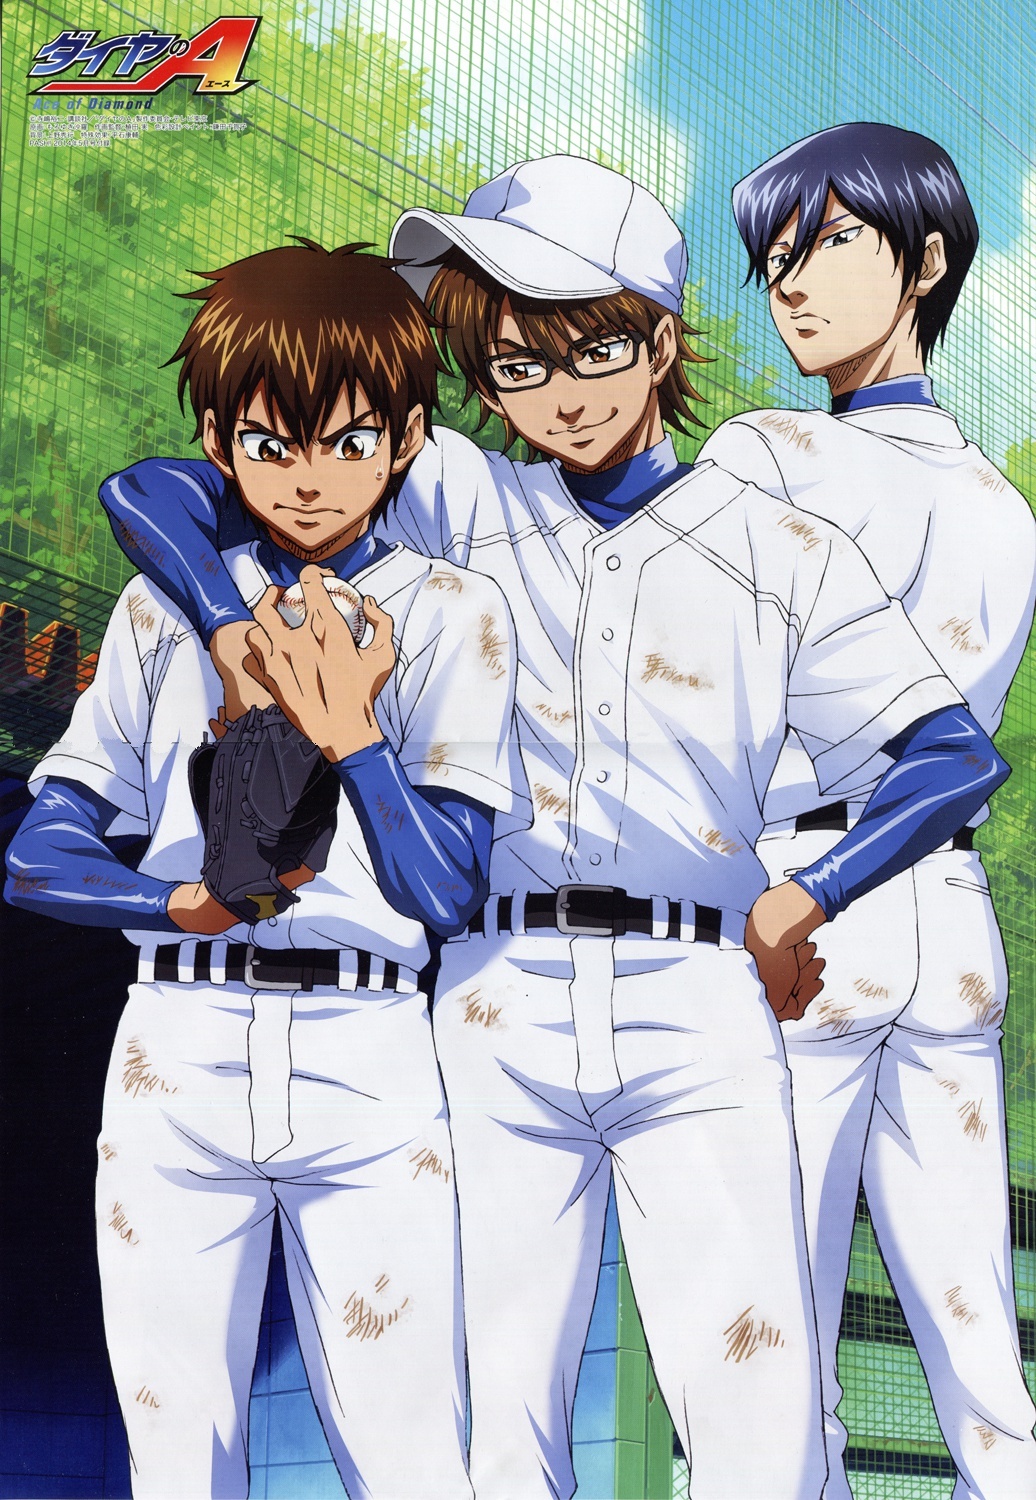 1036x1500 > Ace Of Diamond Wallpapers